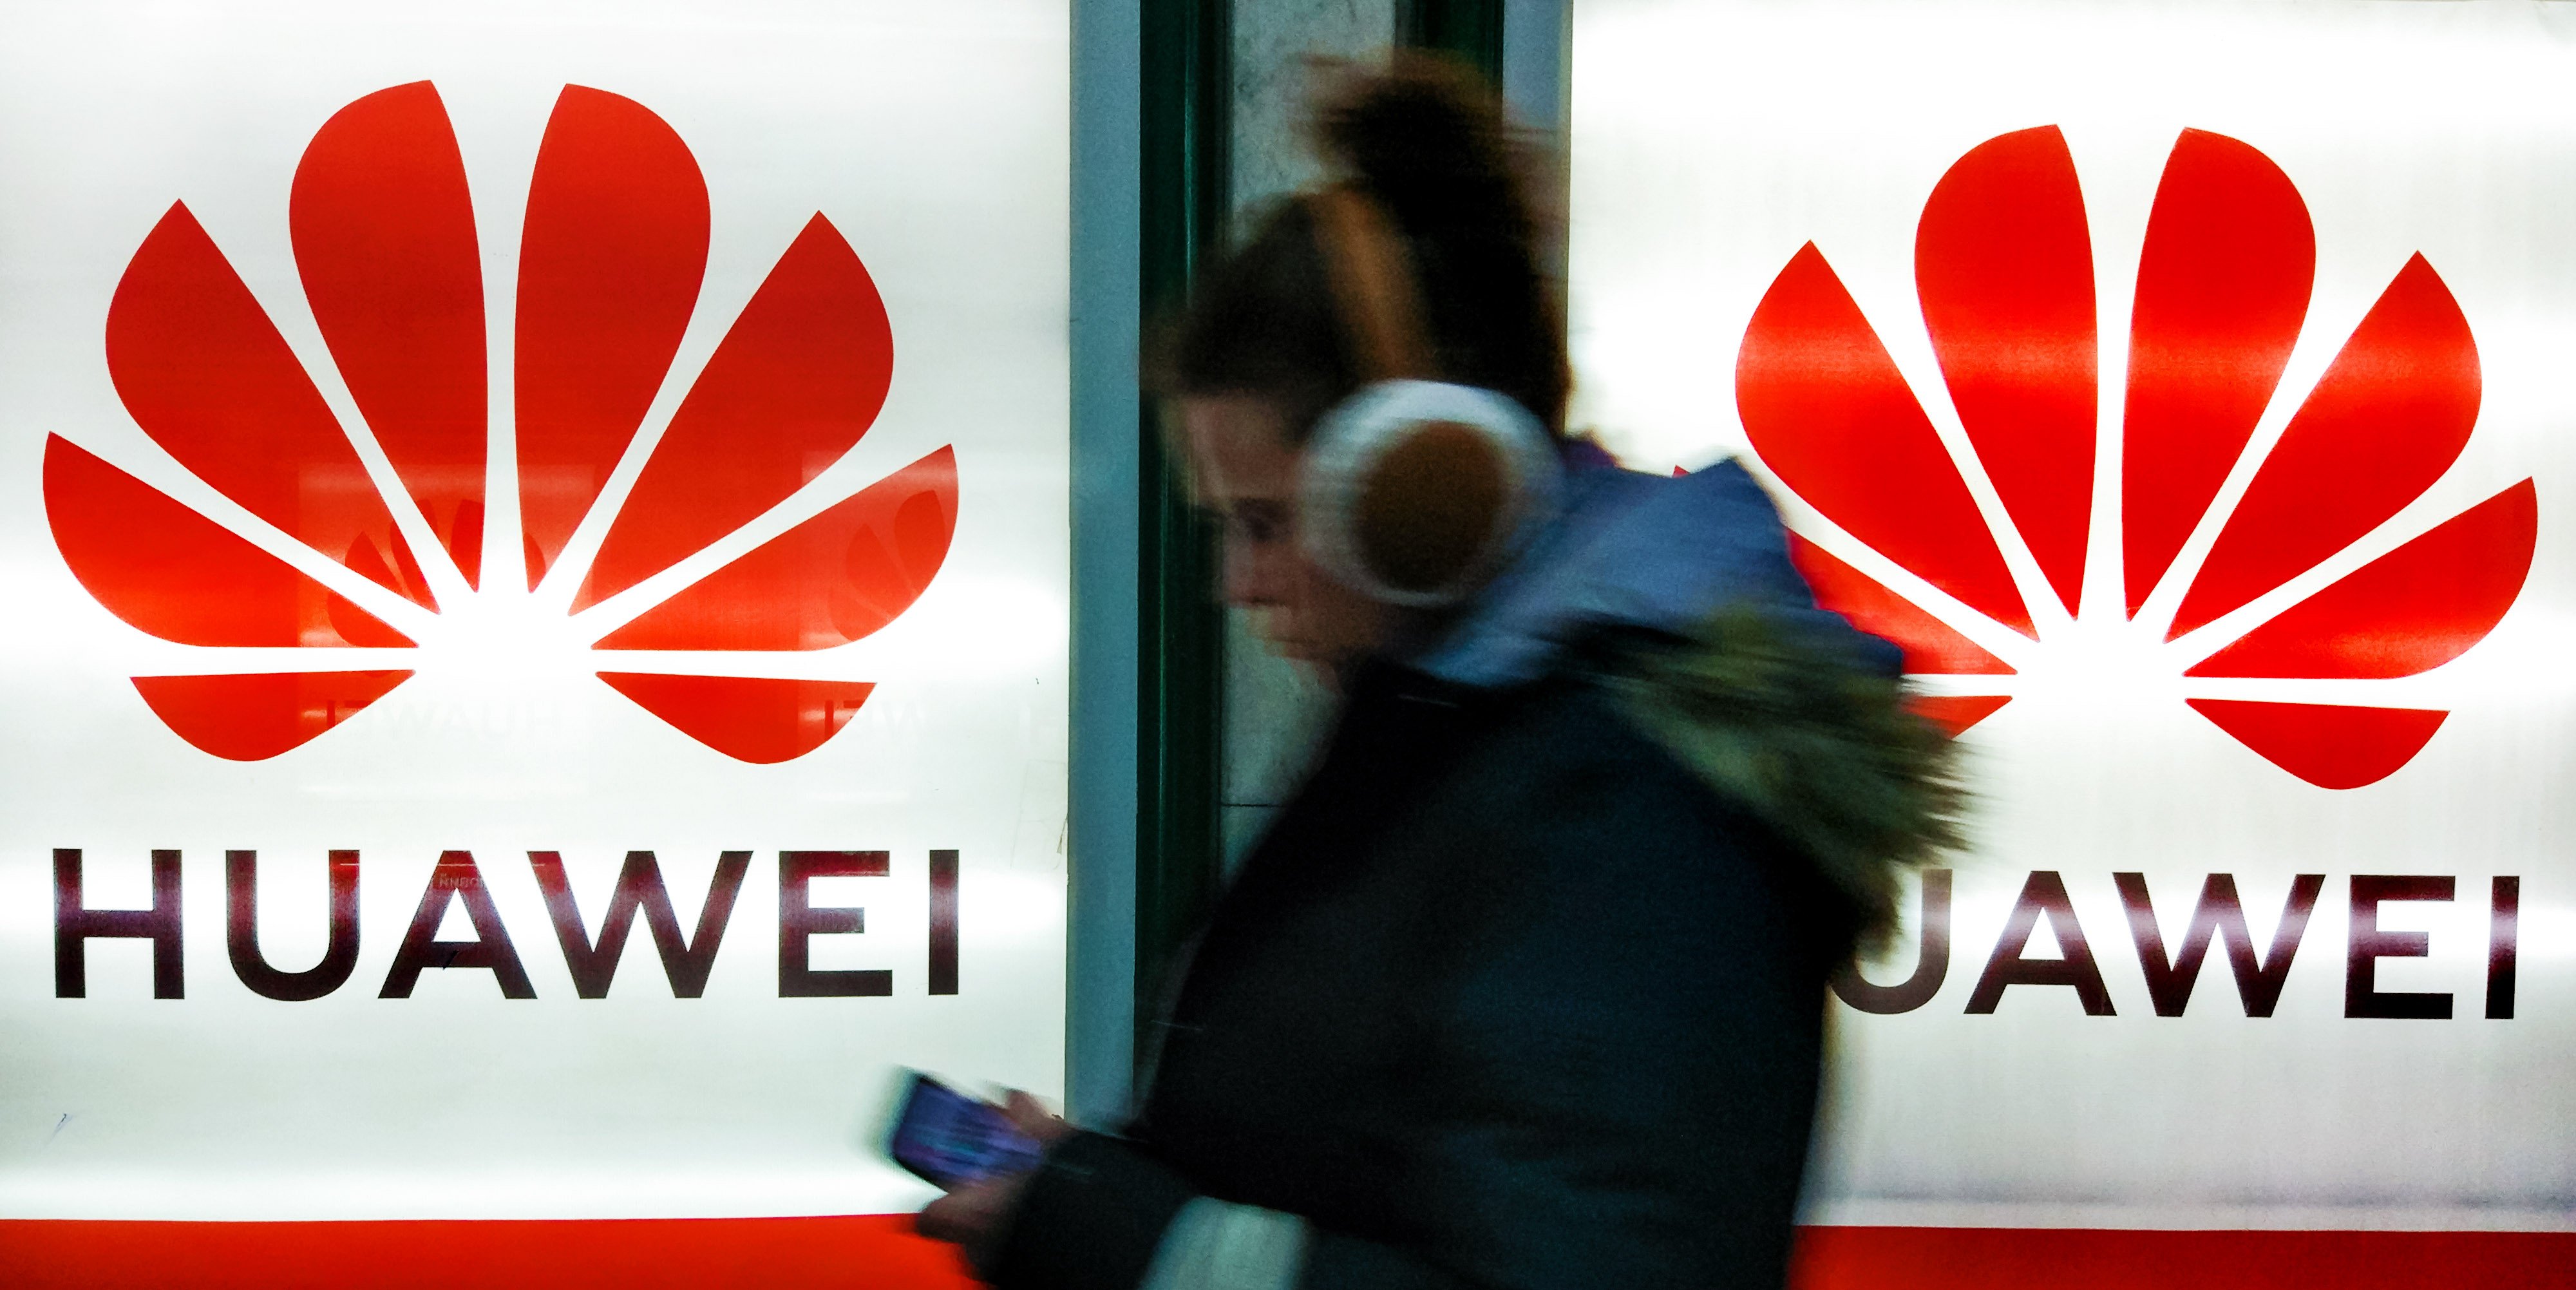 Huawei Technologies Co struggles to stay afloat and remain relevant in its industry in the face of US trade sanctions and Washington’s pressure on its economic allies to bar use of the Chinese firm’s 5G equipment. Photo: Shutterstock 